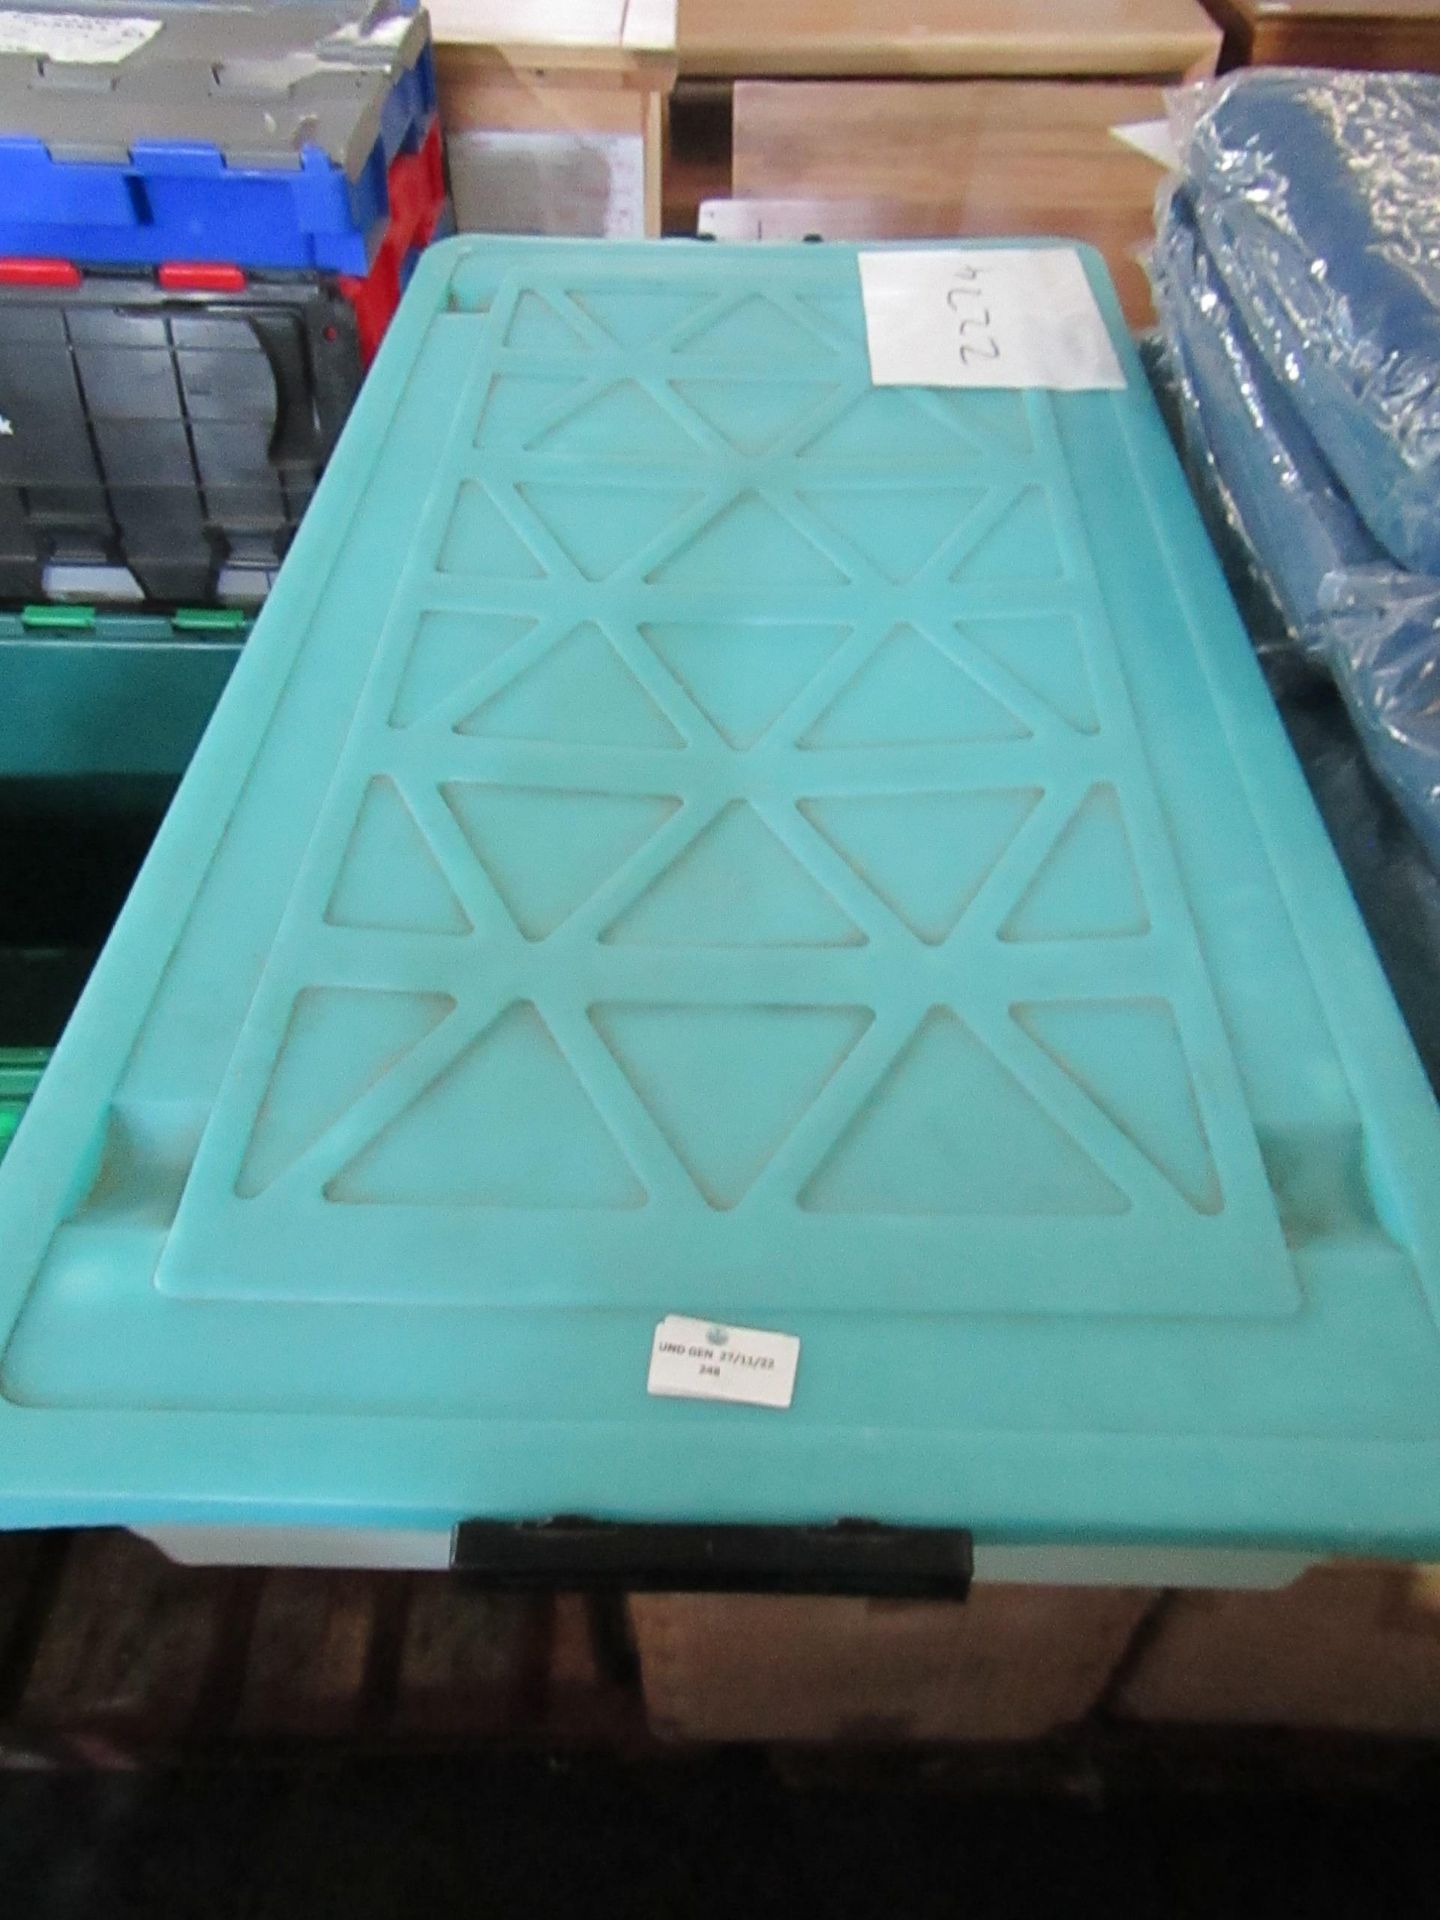 Contico - Large Plastic Storage Box With Wheels - Used Condition, Still Very Usable.